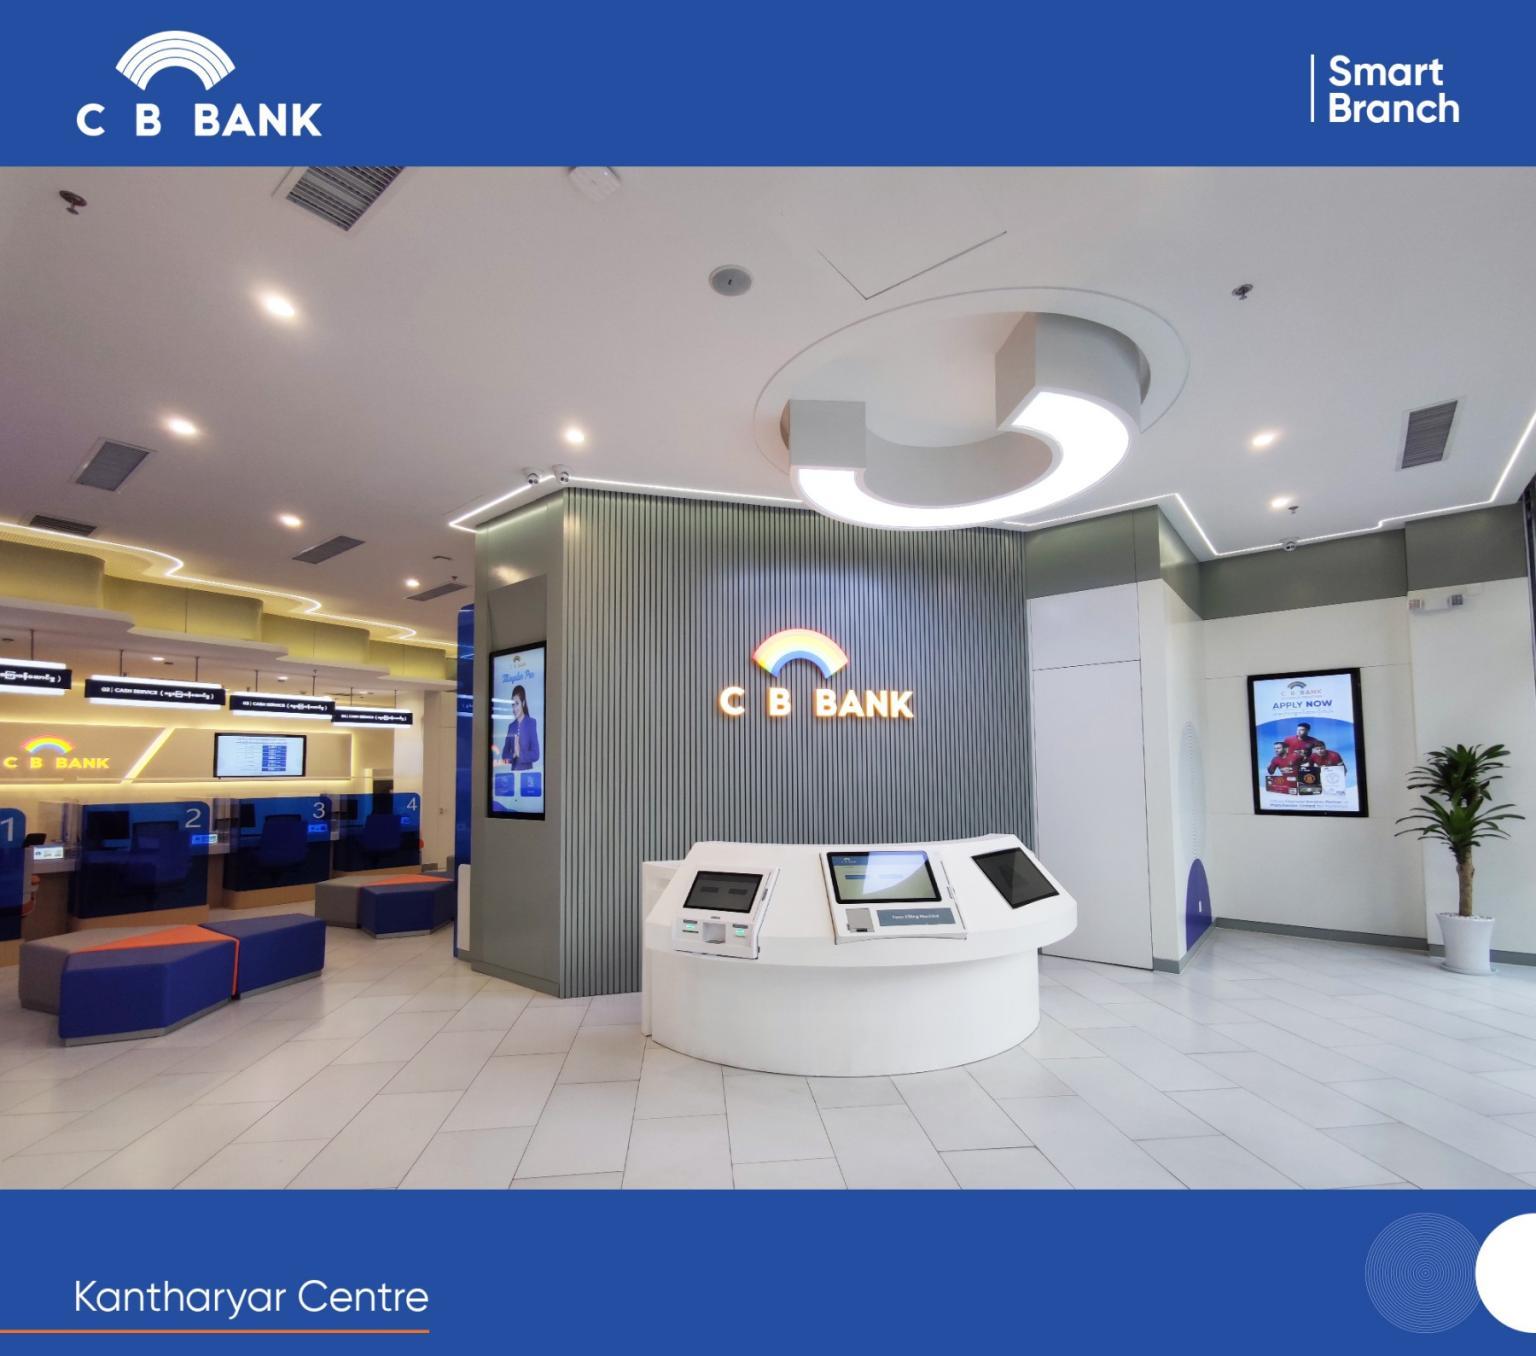 Cb Bank Becomes The First Bank Who Launch Smart Branch In Myanmar Cci France Myanmar